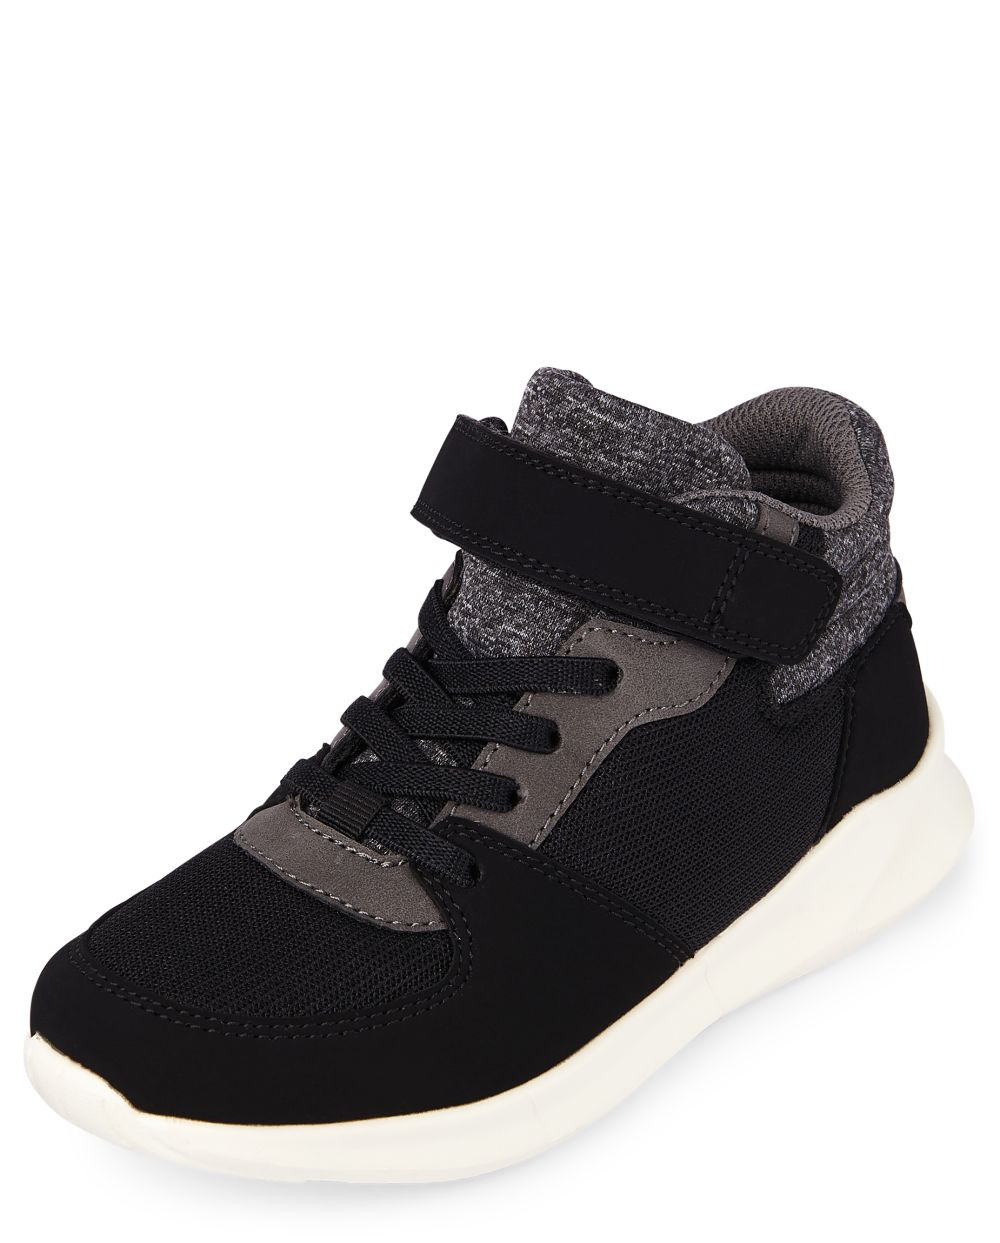 

Boys Boys Colorblock Mid Top Sneakers - Black - The Children's Place